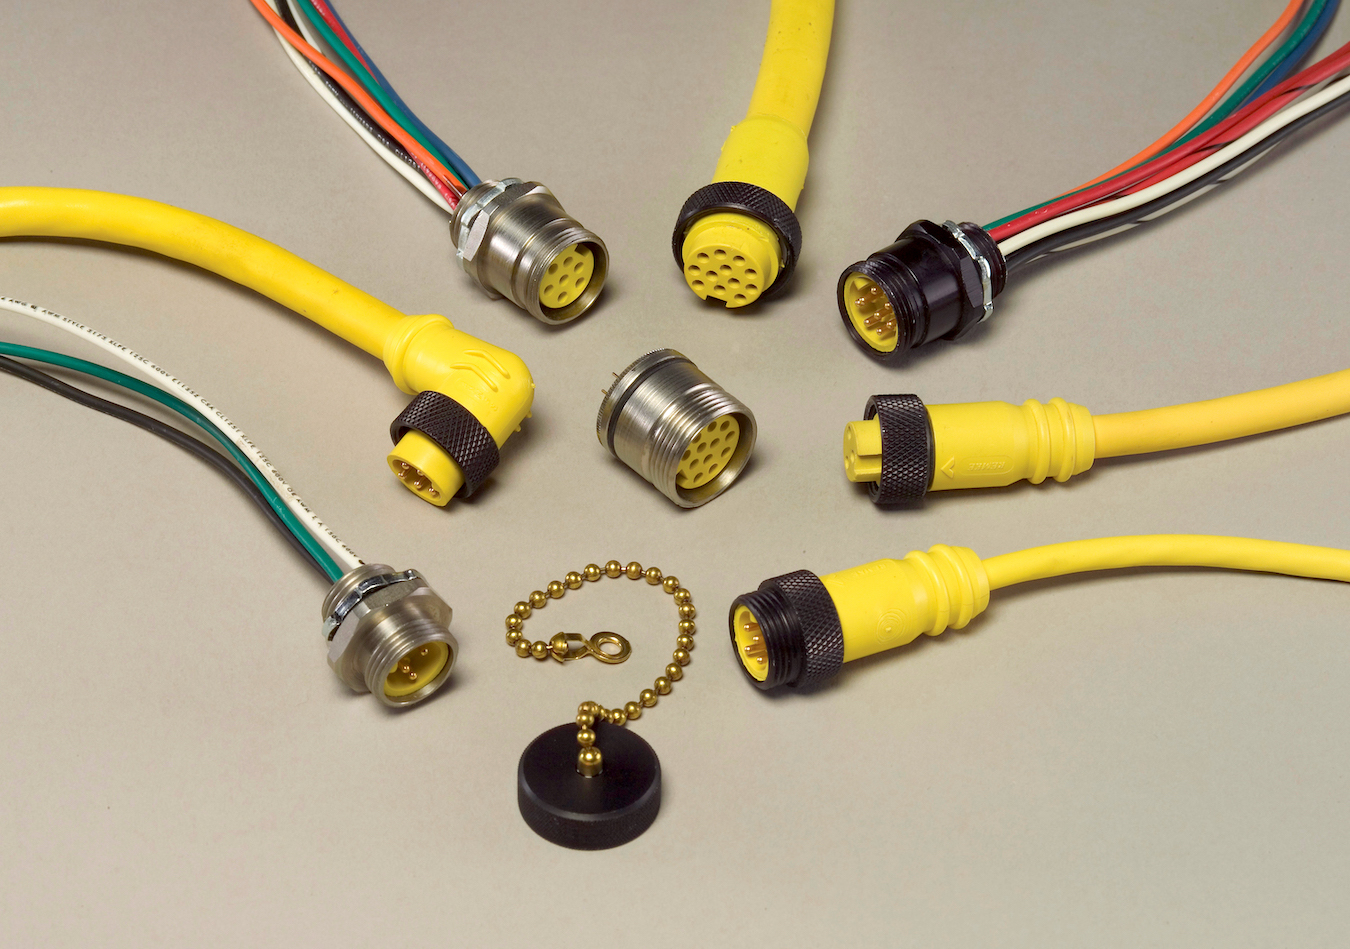 high-temperature connector products from Remke